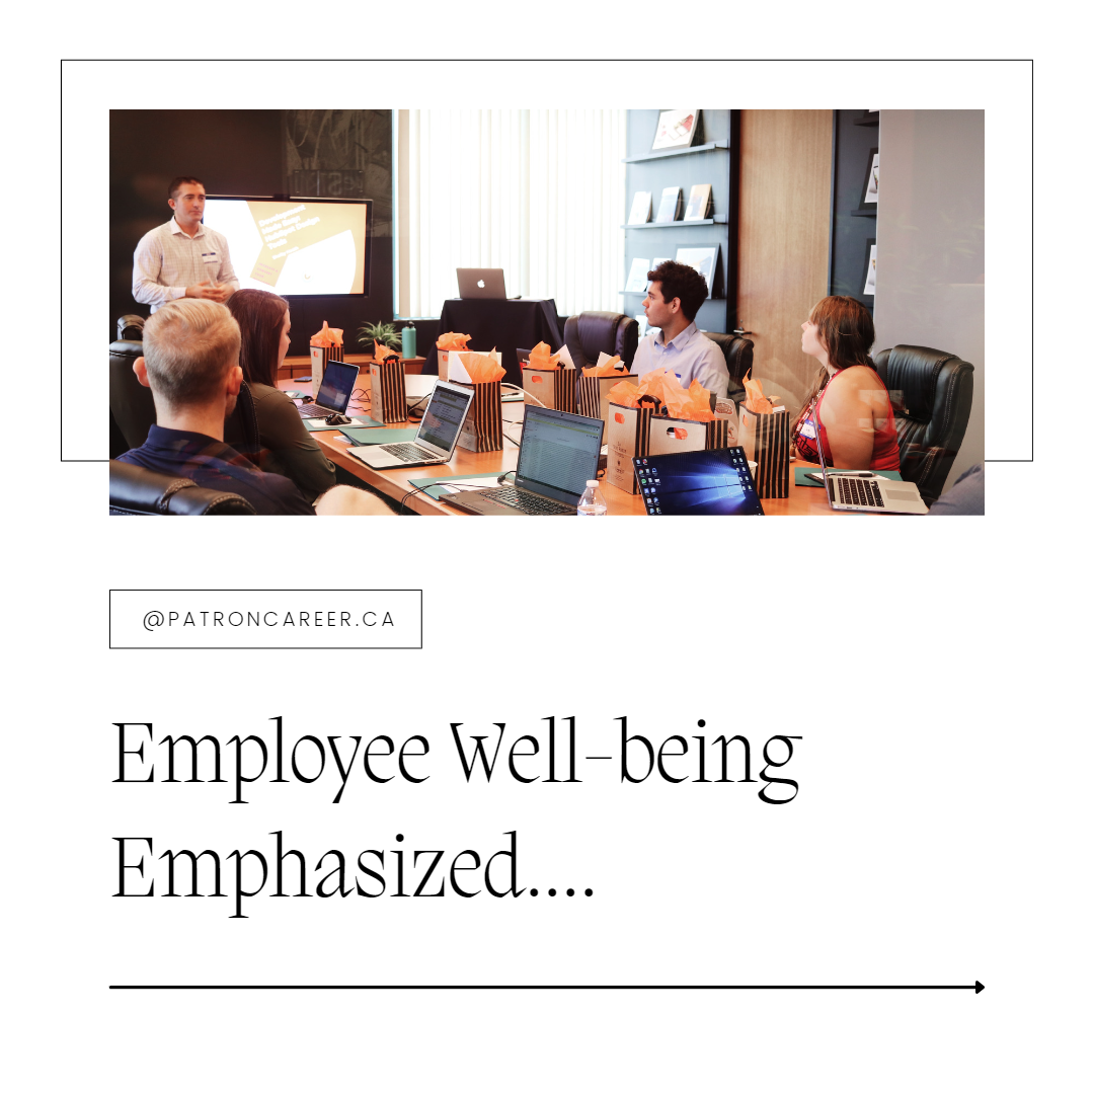 Understanding The Mental and Overall Well-Being of Employees